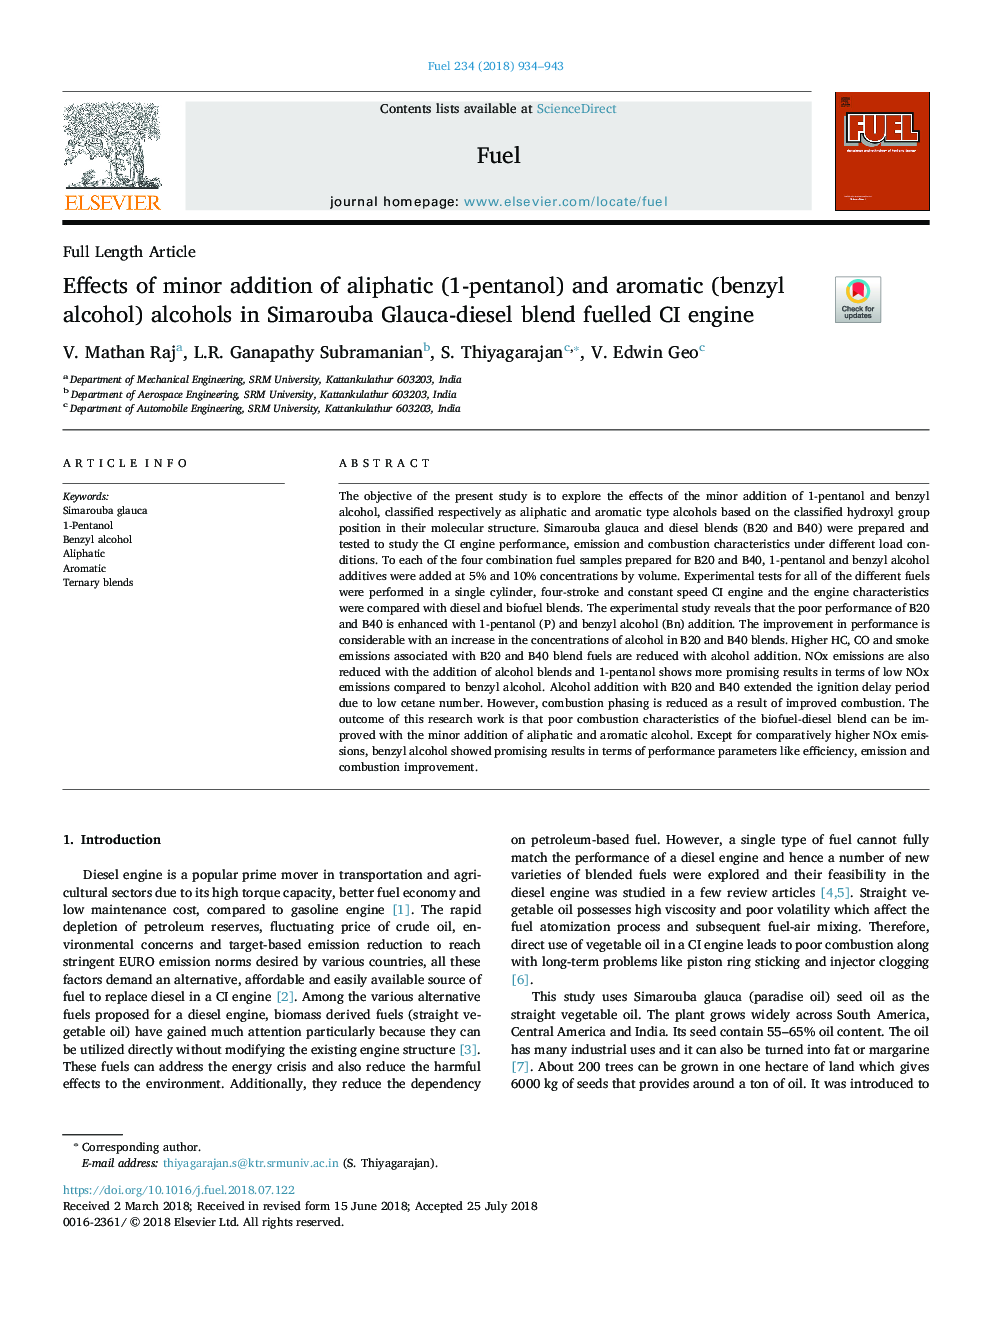 Effects of minor addition of aliphatic (1-pentanol) and aromatic (benzyl alcohol) alcohols in Simarouba Glauca-diesel blend fuelled CI engine